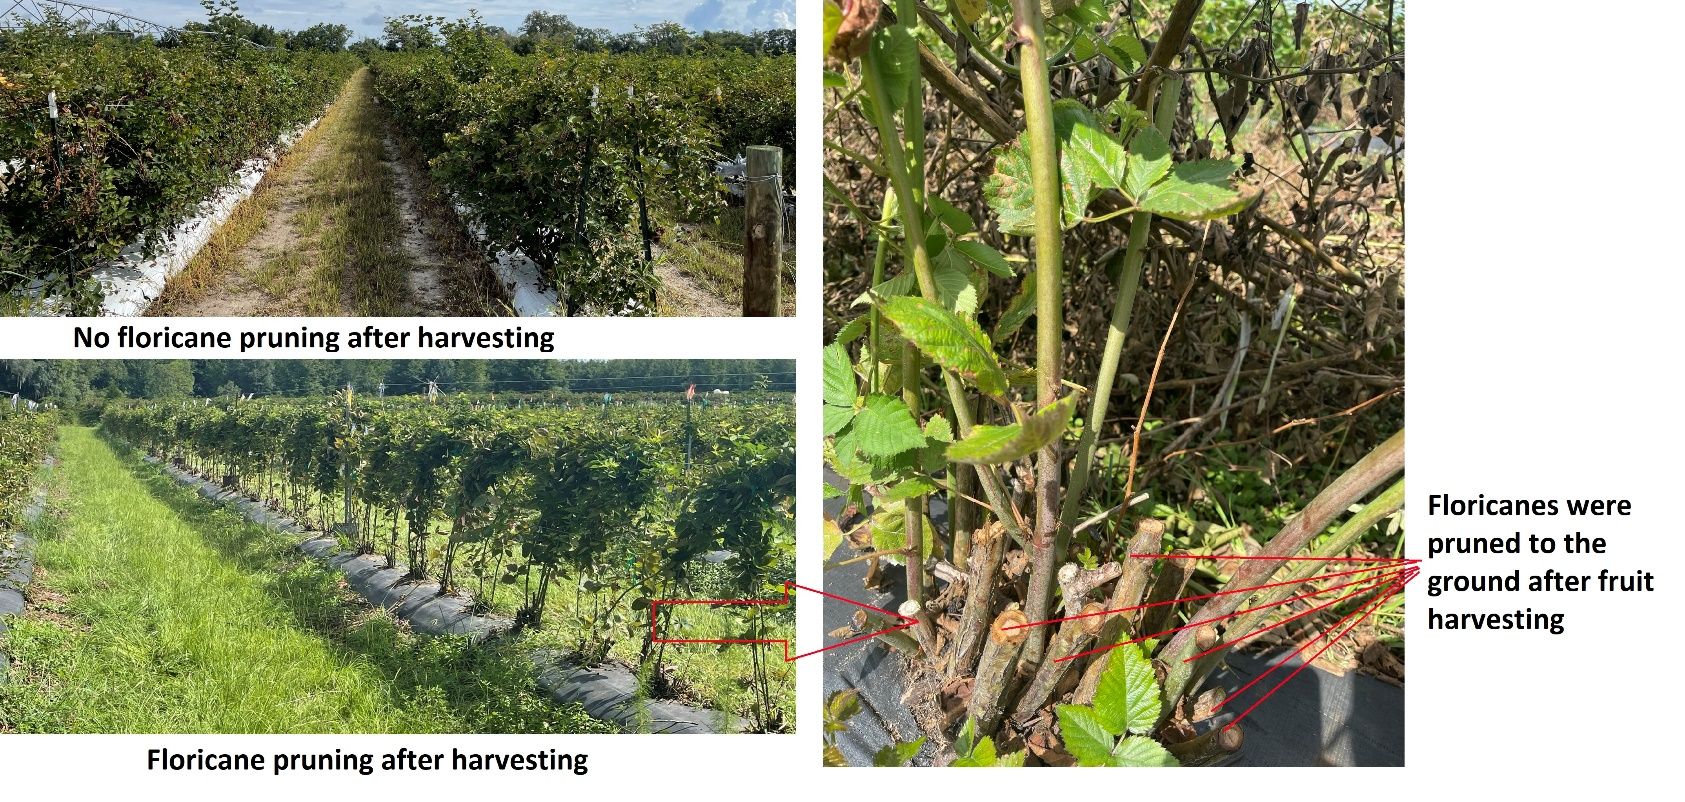 Blackberry plants before (top) and after (bottom) floricane pruning.